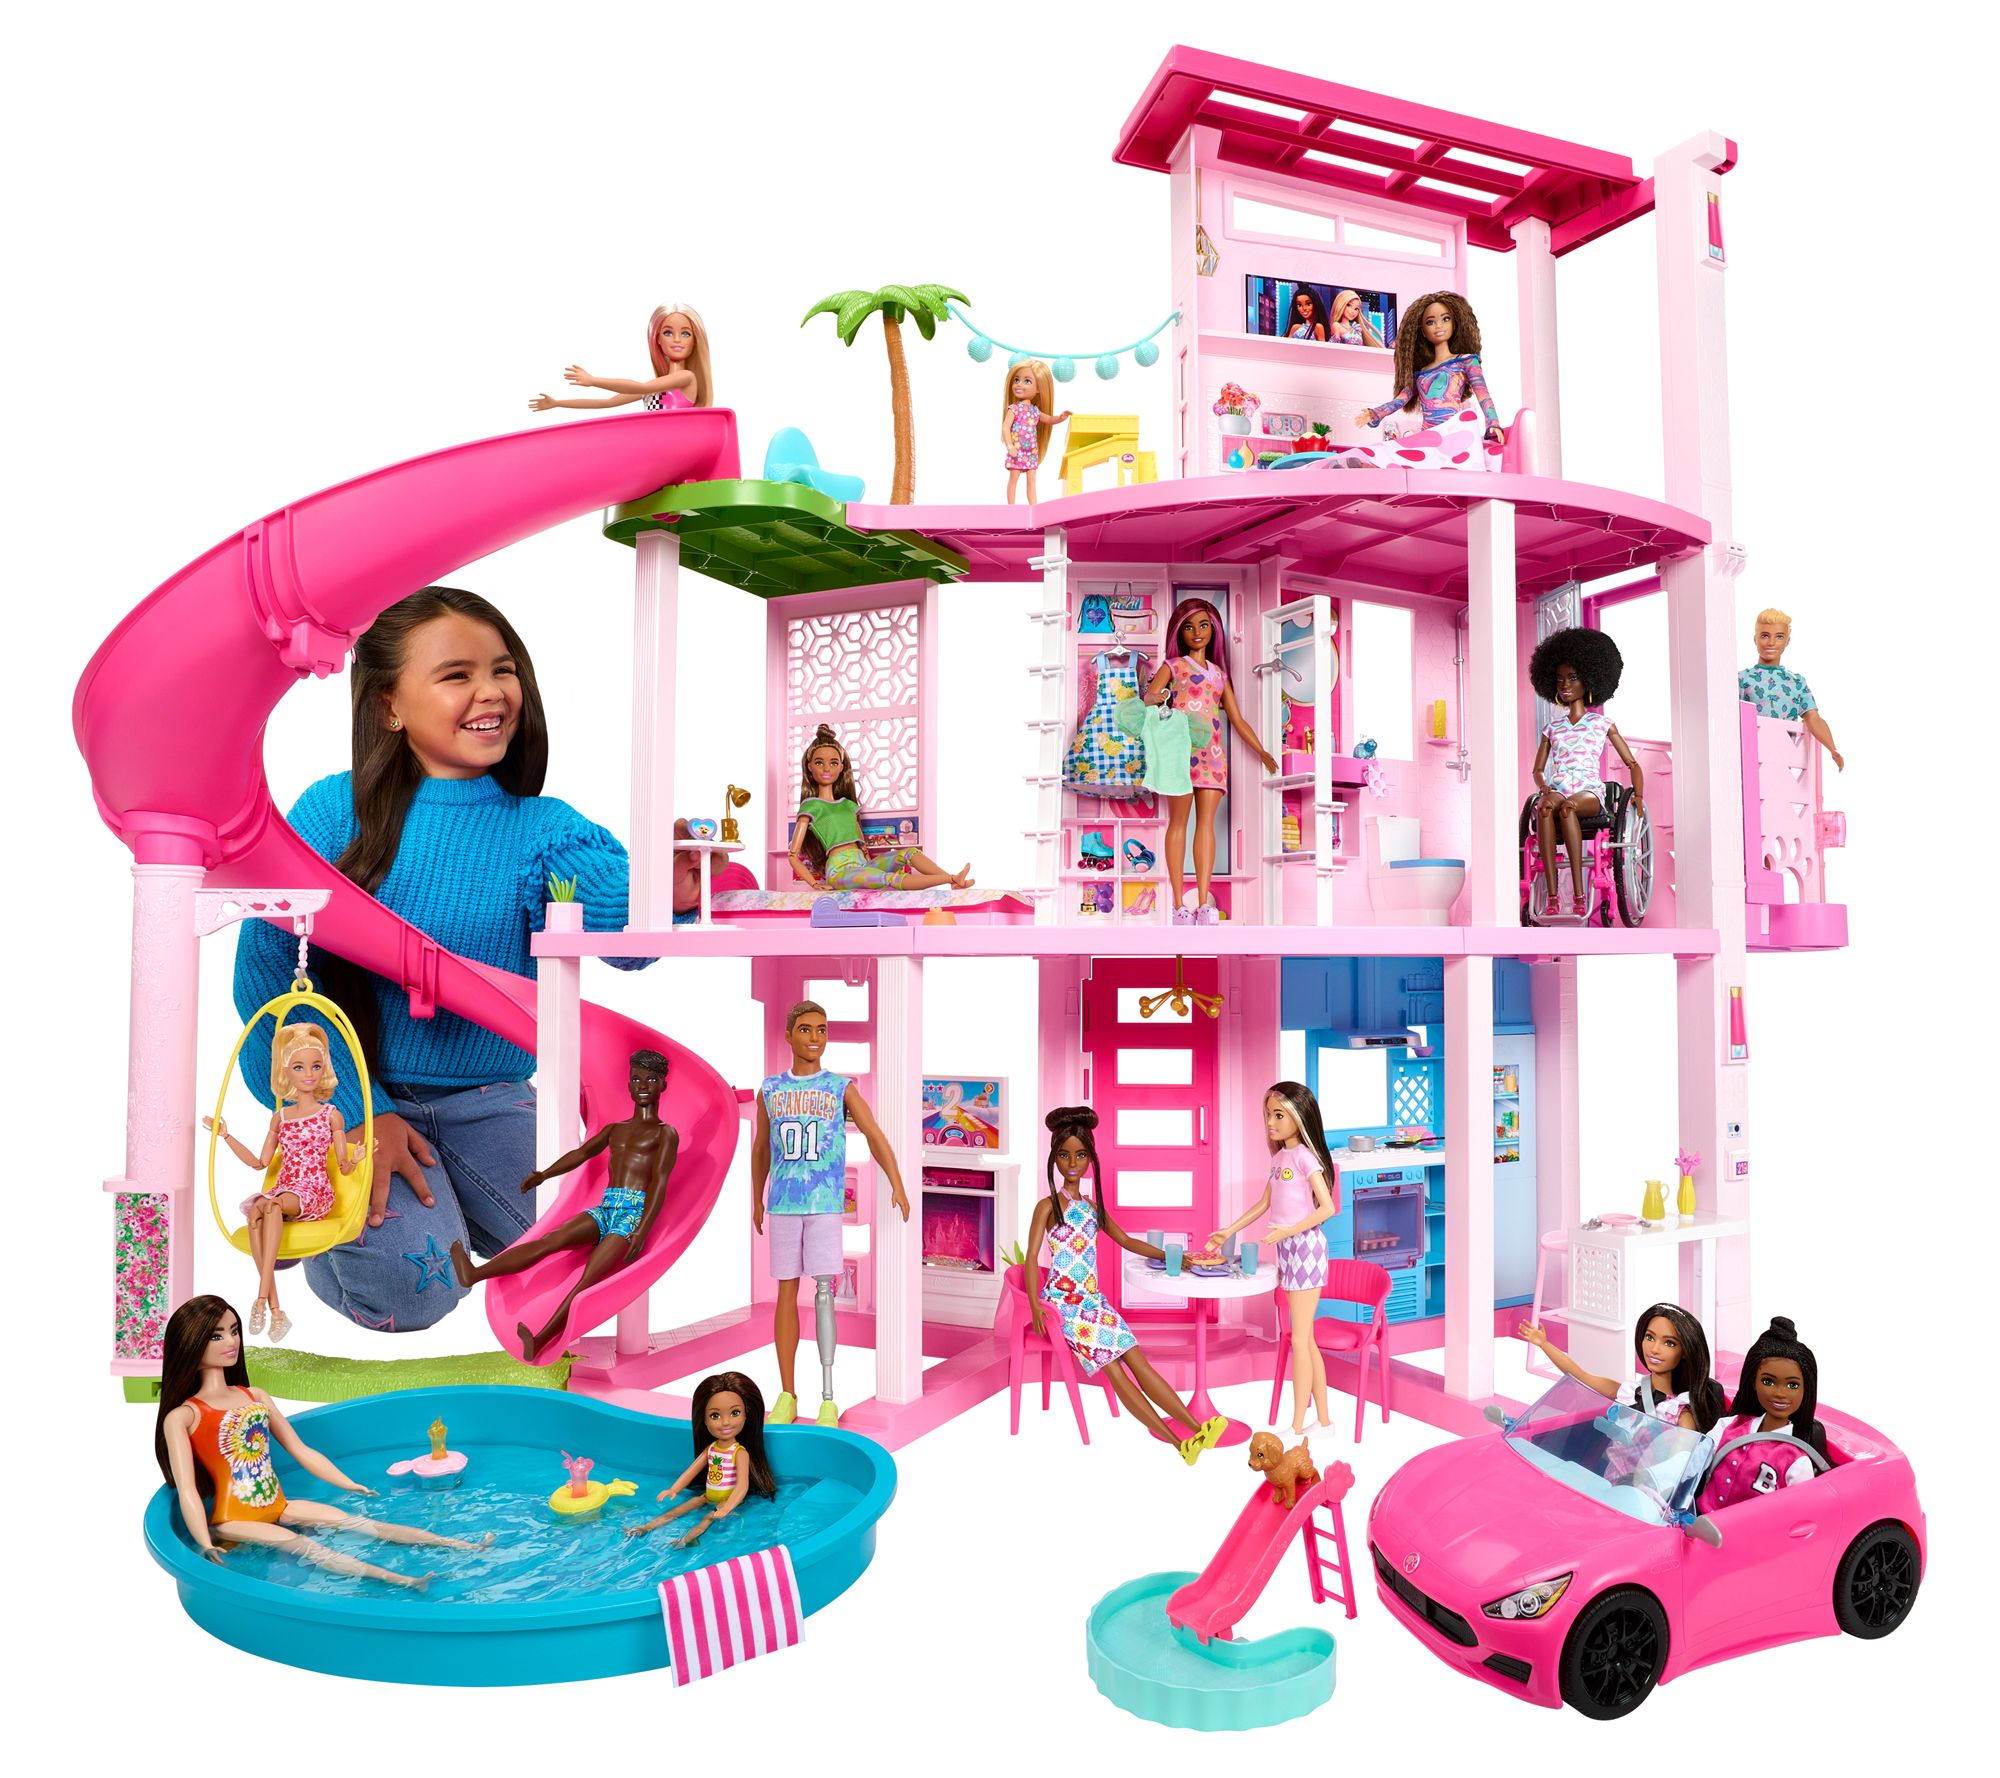 60 Years of Dreams: A Comprehensive Overview of Barbie's Dreamhouses